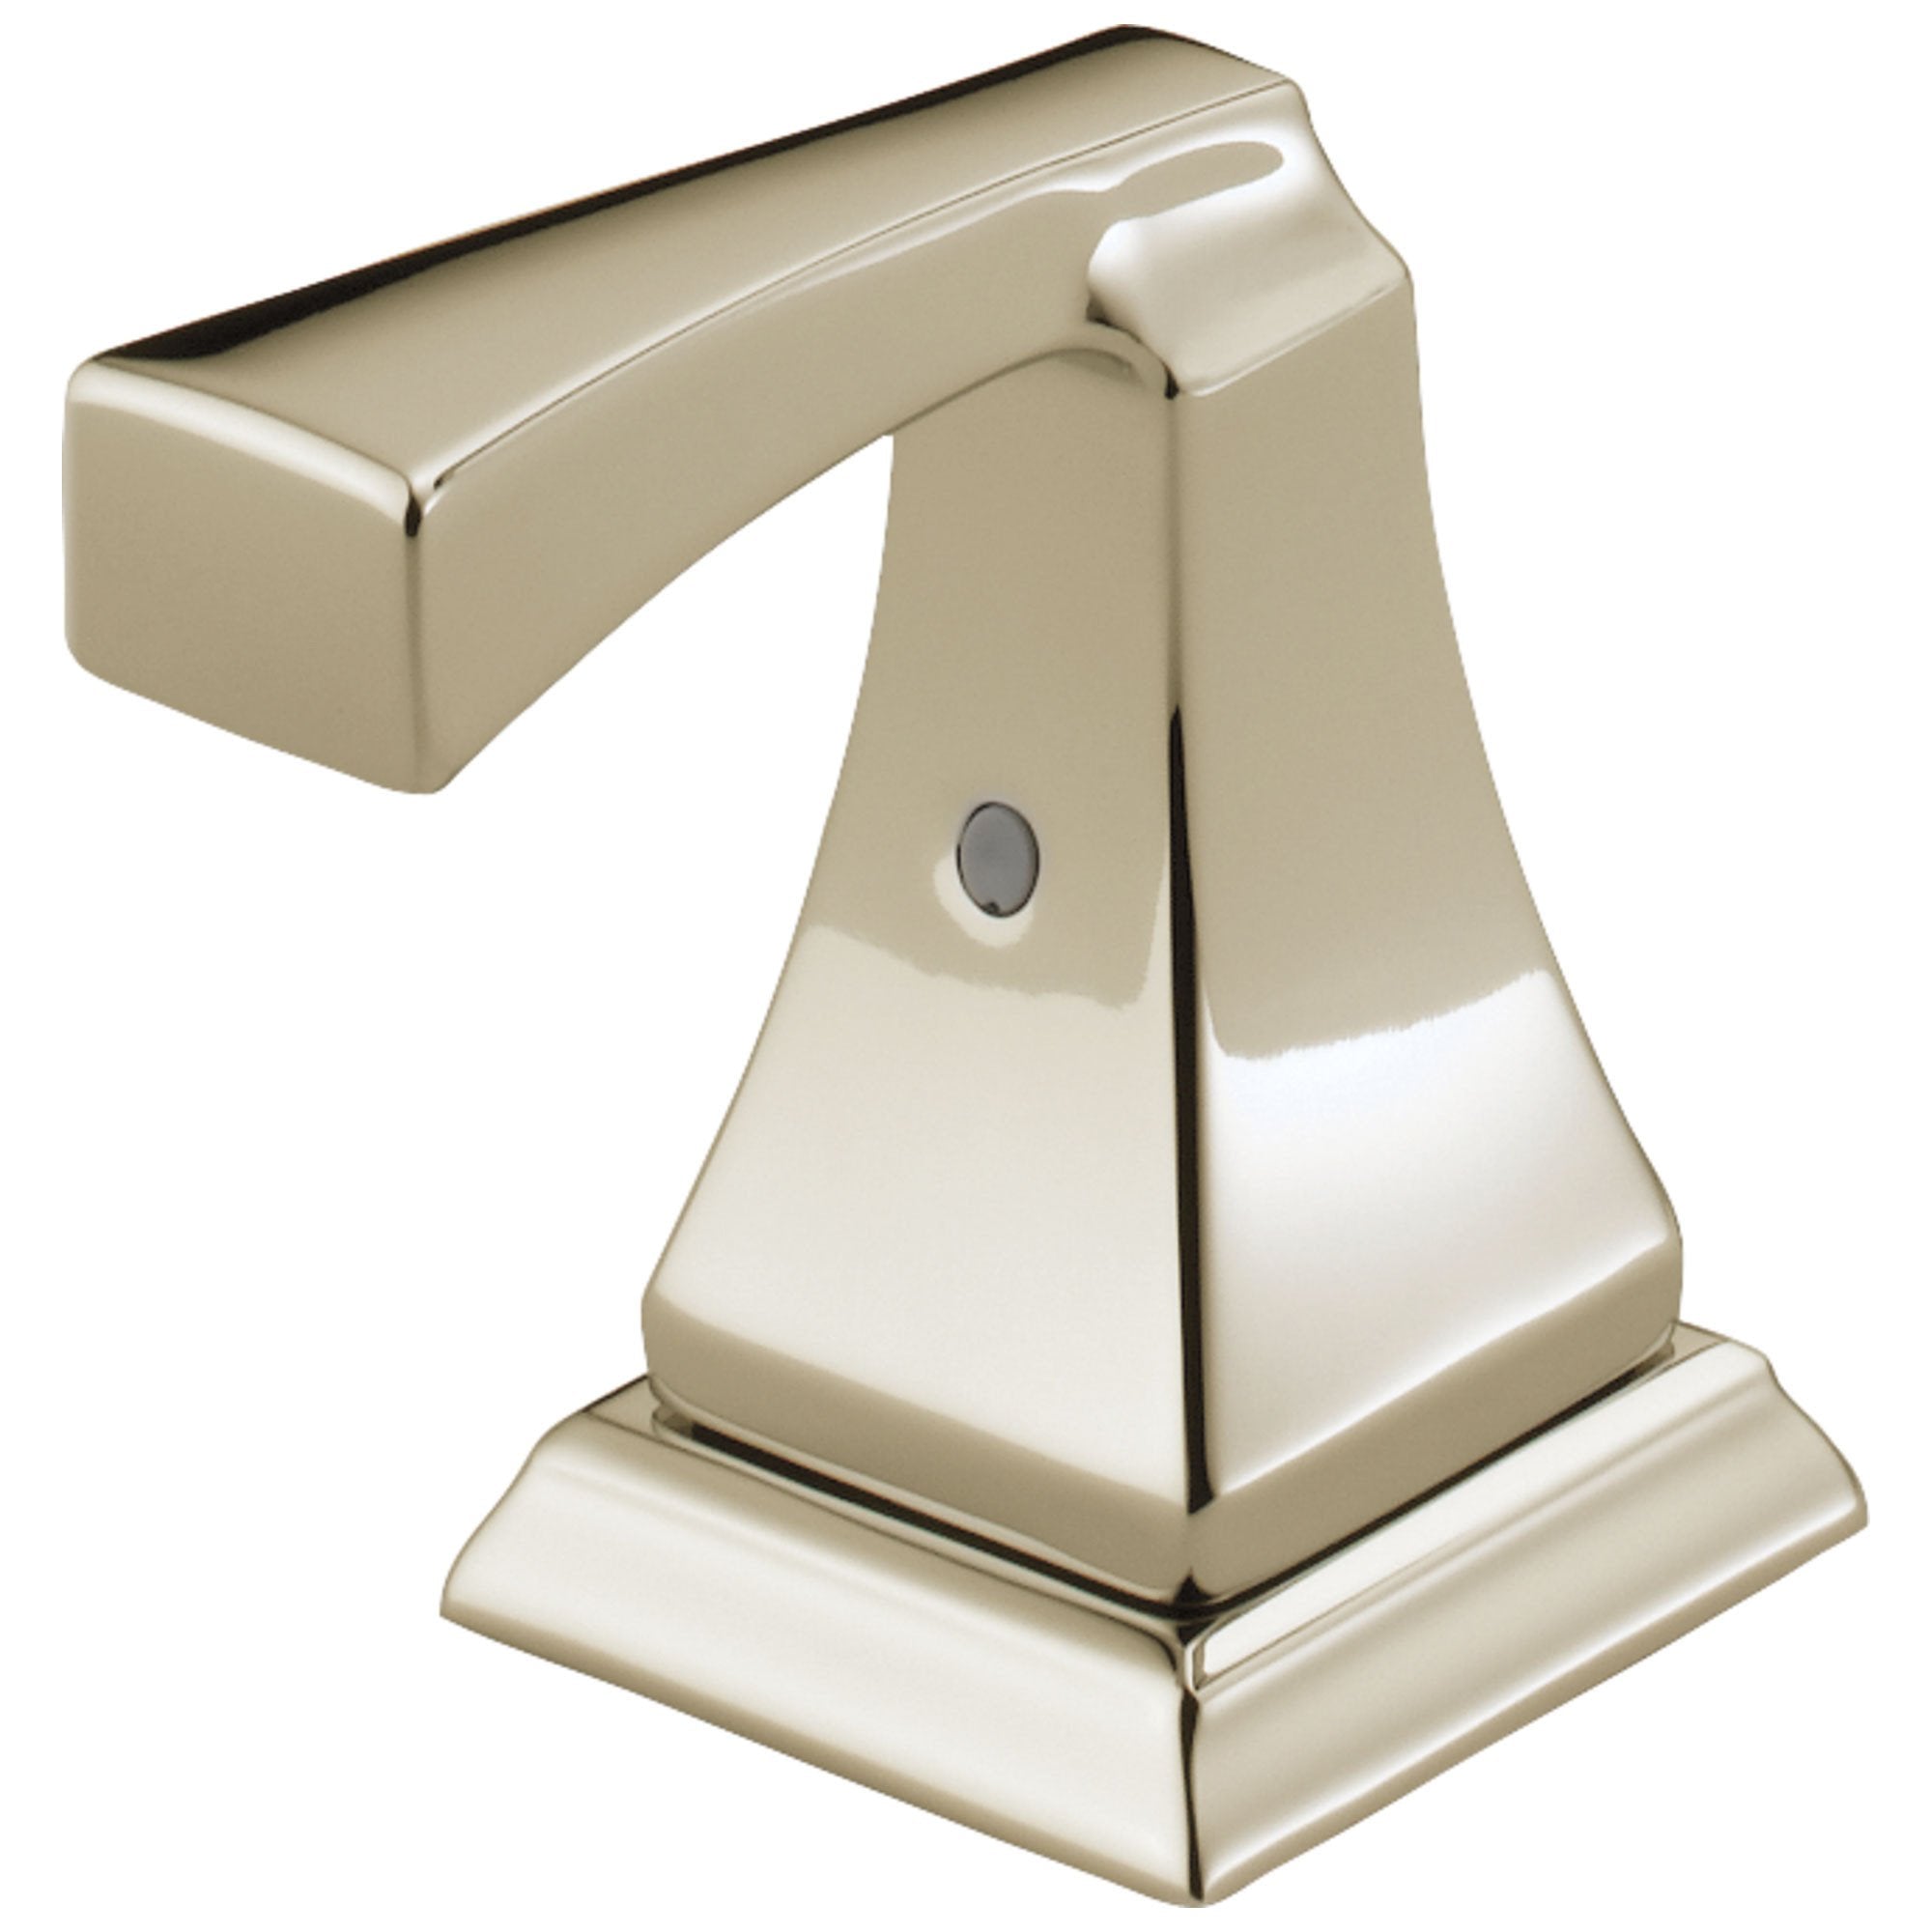 Delta Dryden Collection Polished Nickel Finish Lavatory Metal Lever Handles - Quantity 2 Included DH251PN